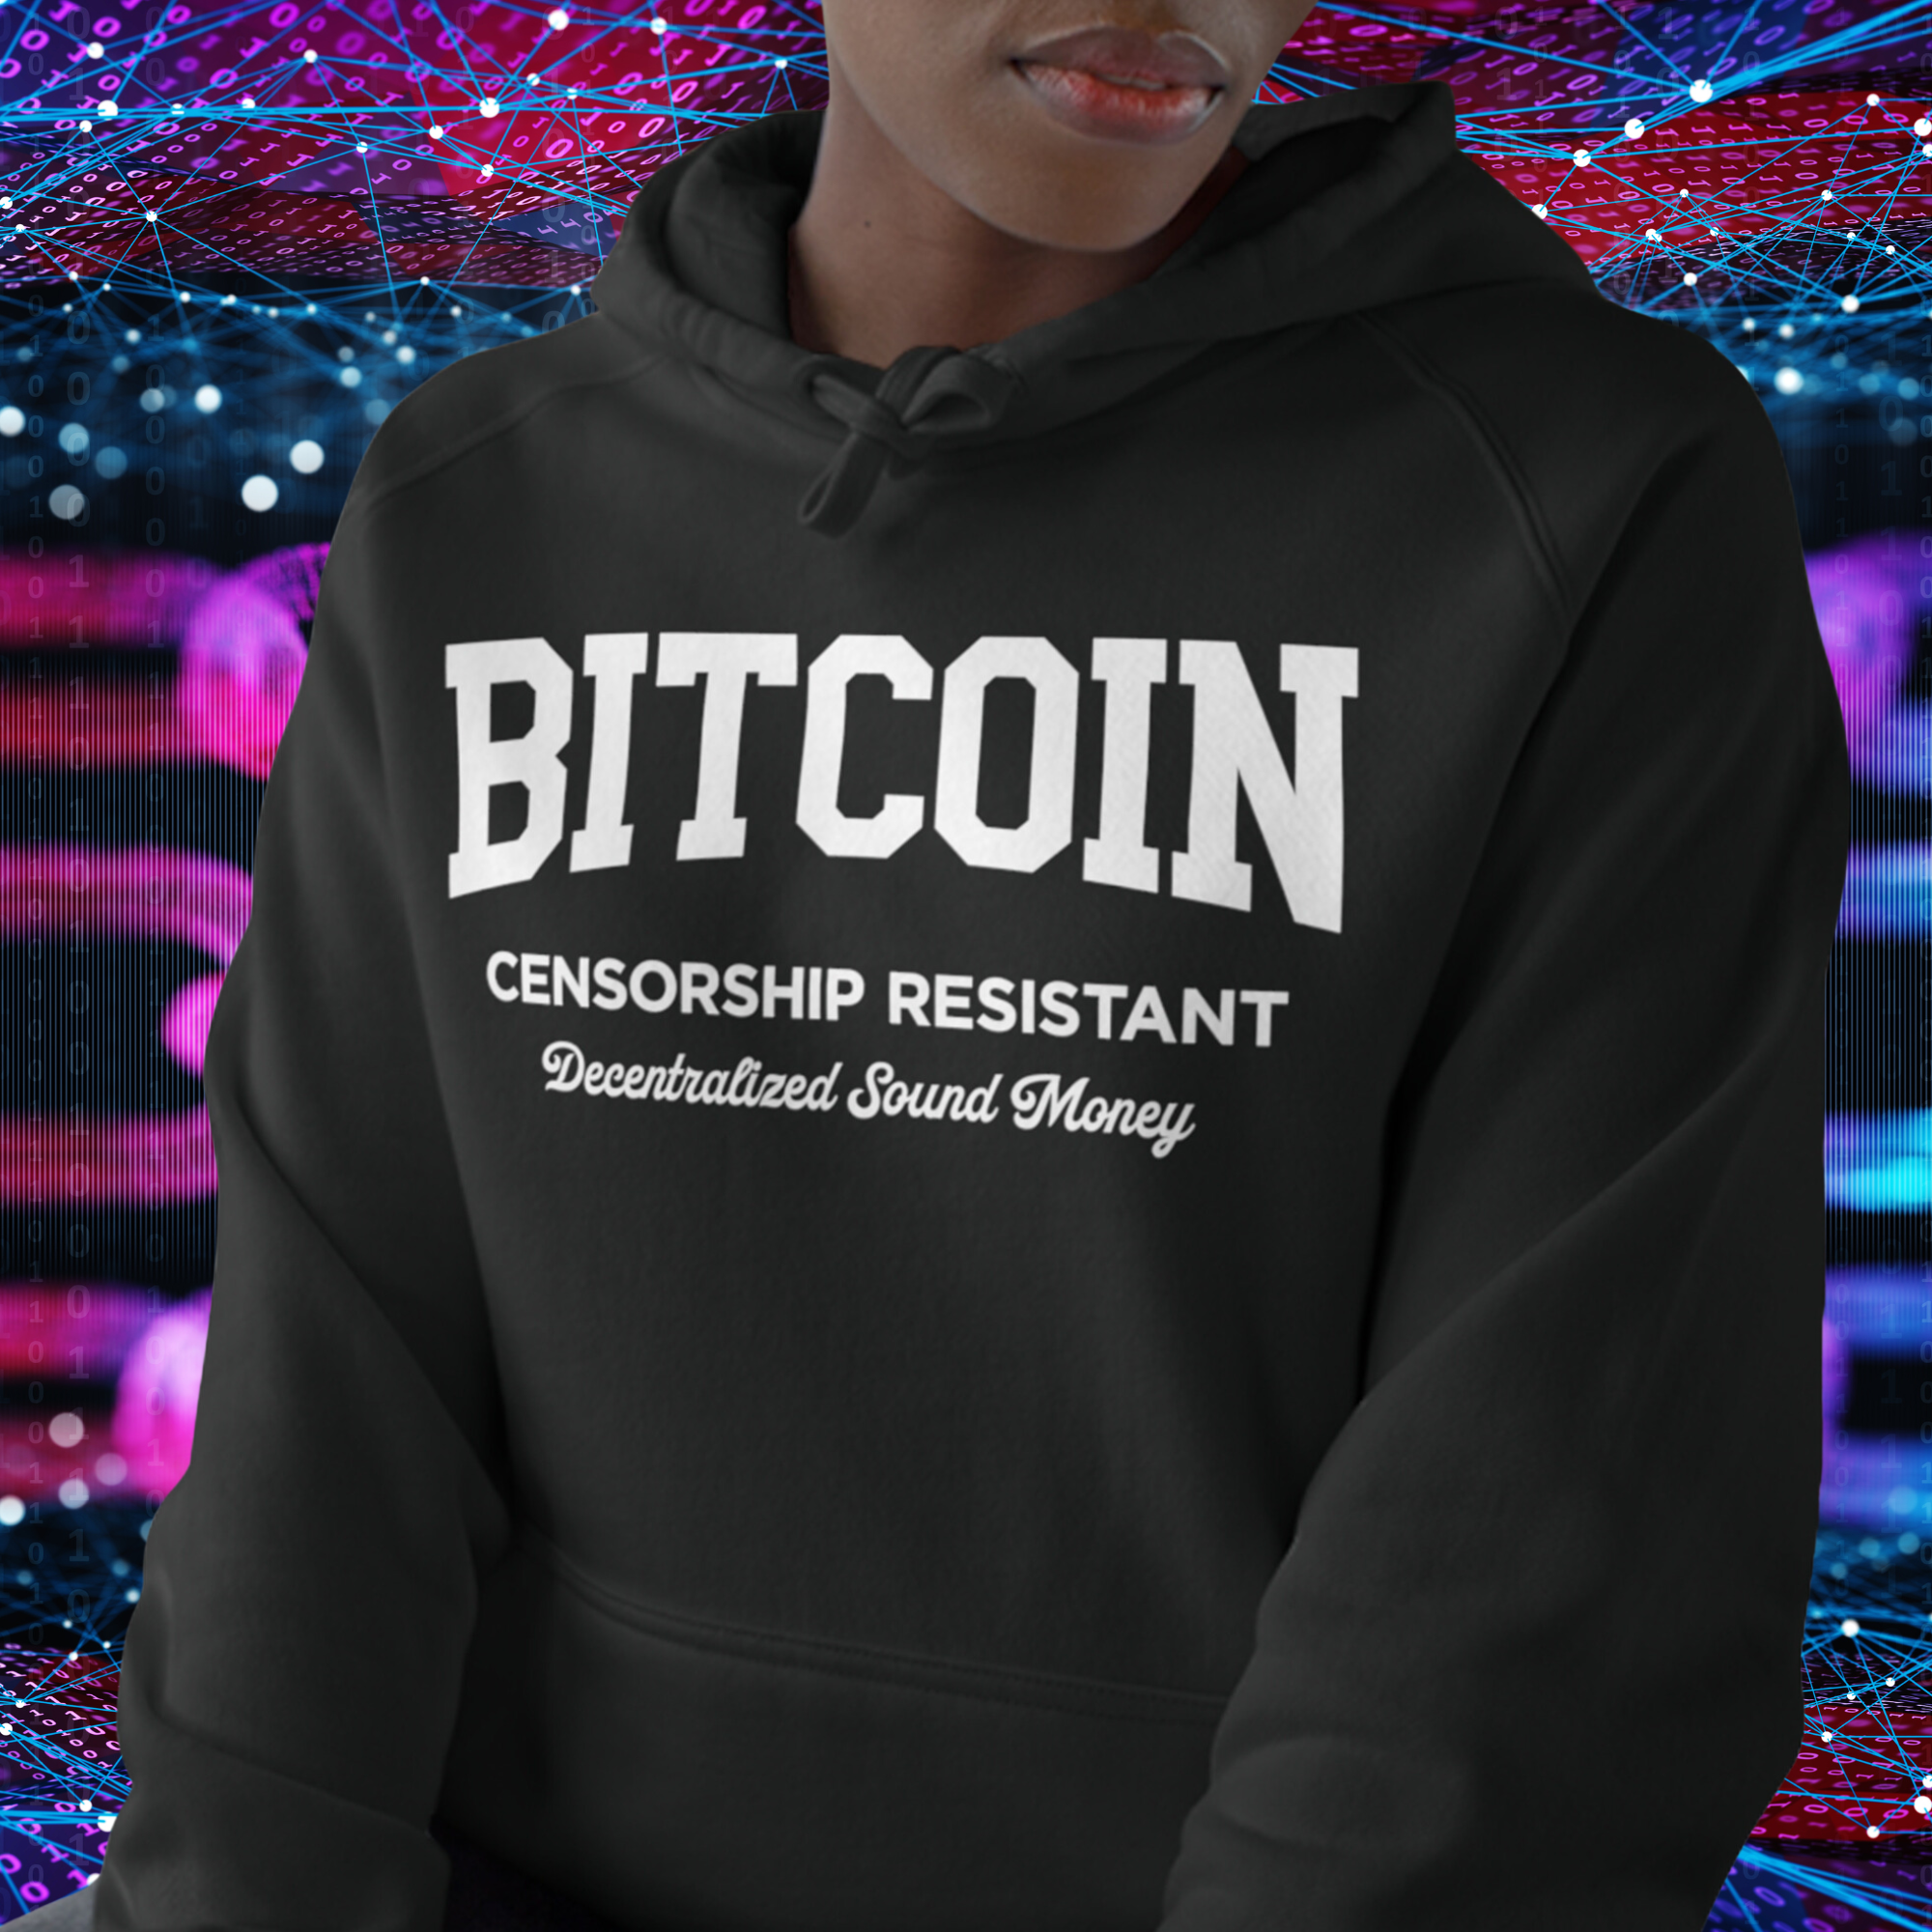 Bitcoin Clothing - Bitcoin Censorship Resistant Hoodie worn by a female model. Front view.